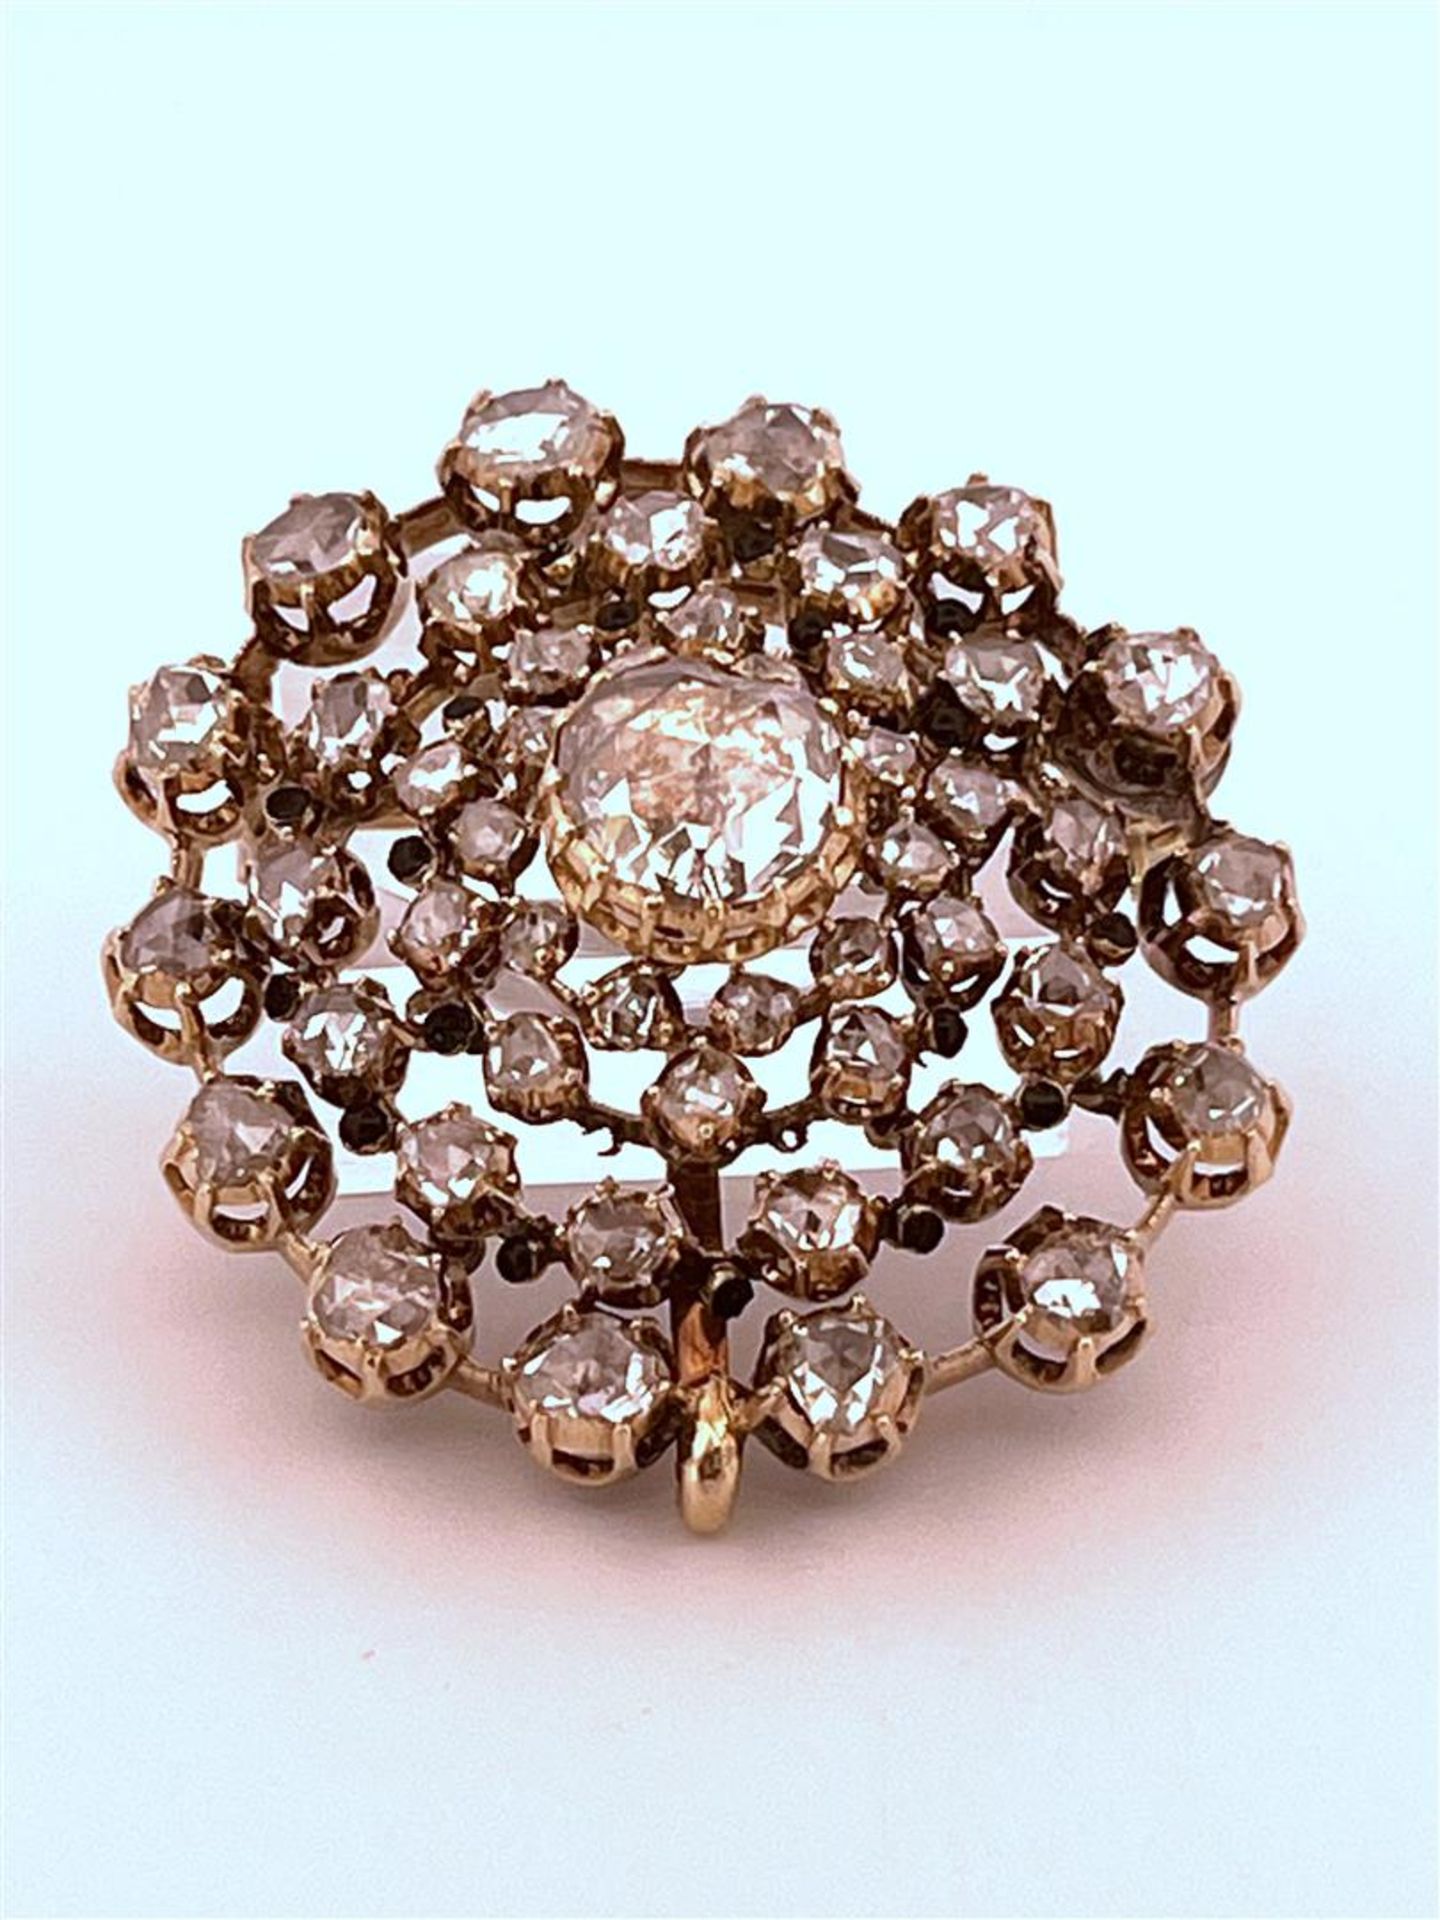 14kt yellow gold antique cluster brooch set with diamonds.
The brooch has a brooch pin, a hook and a